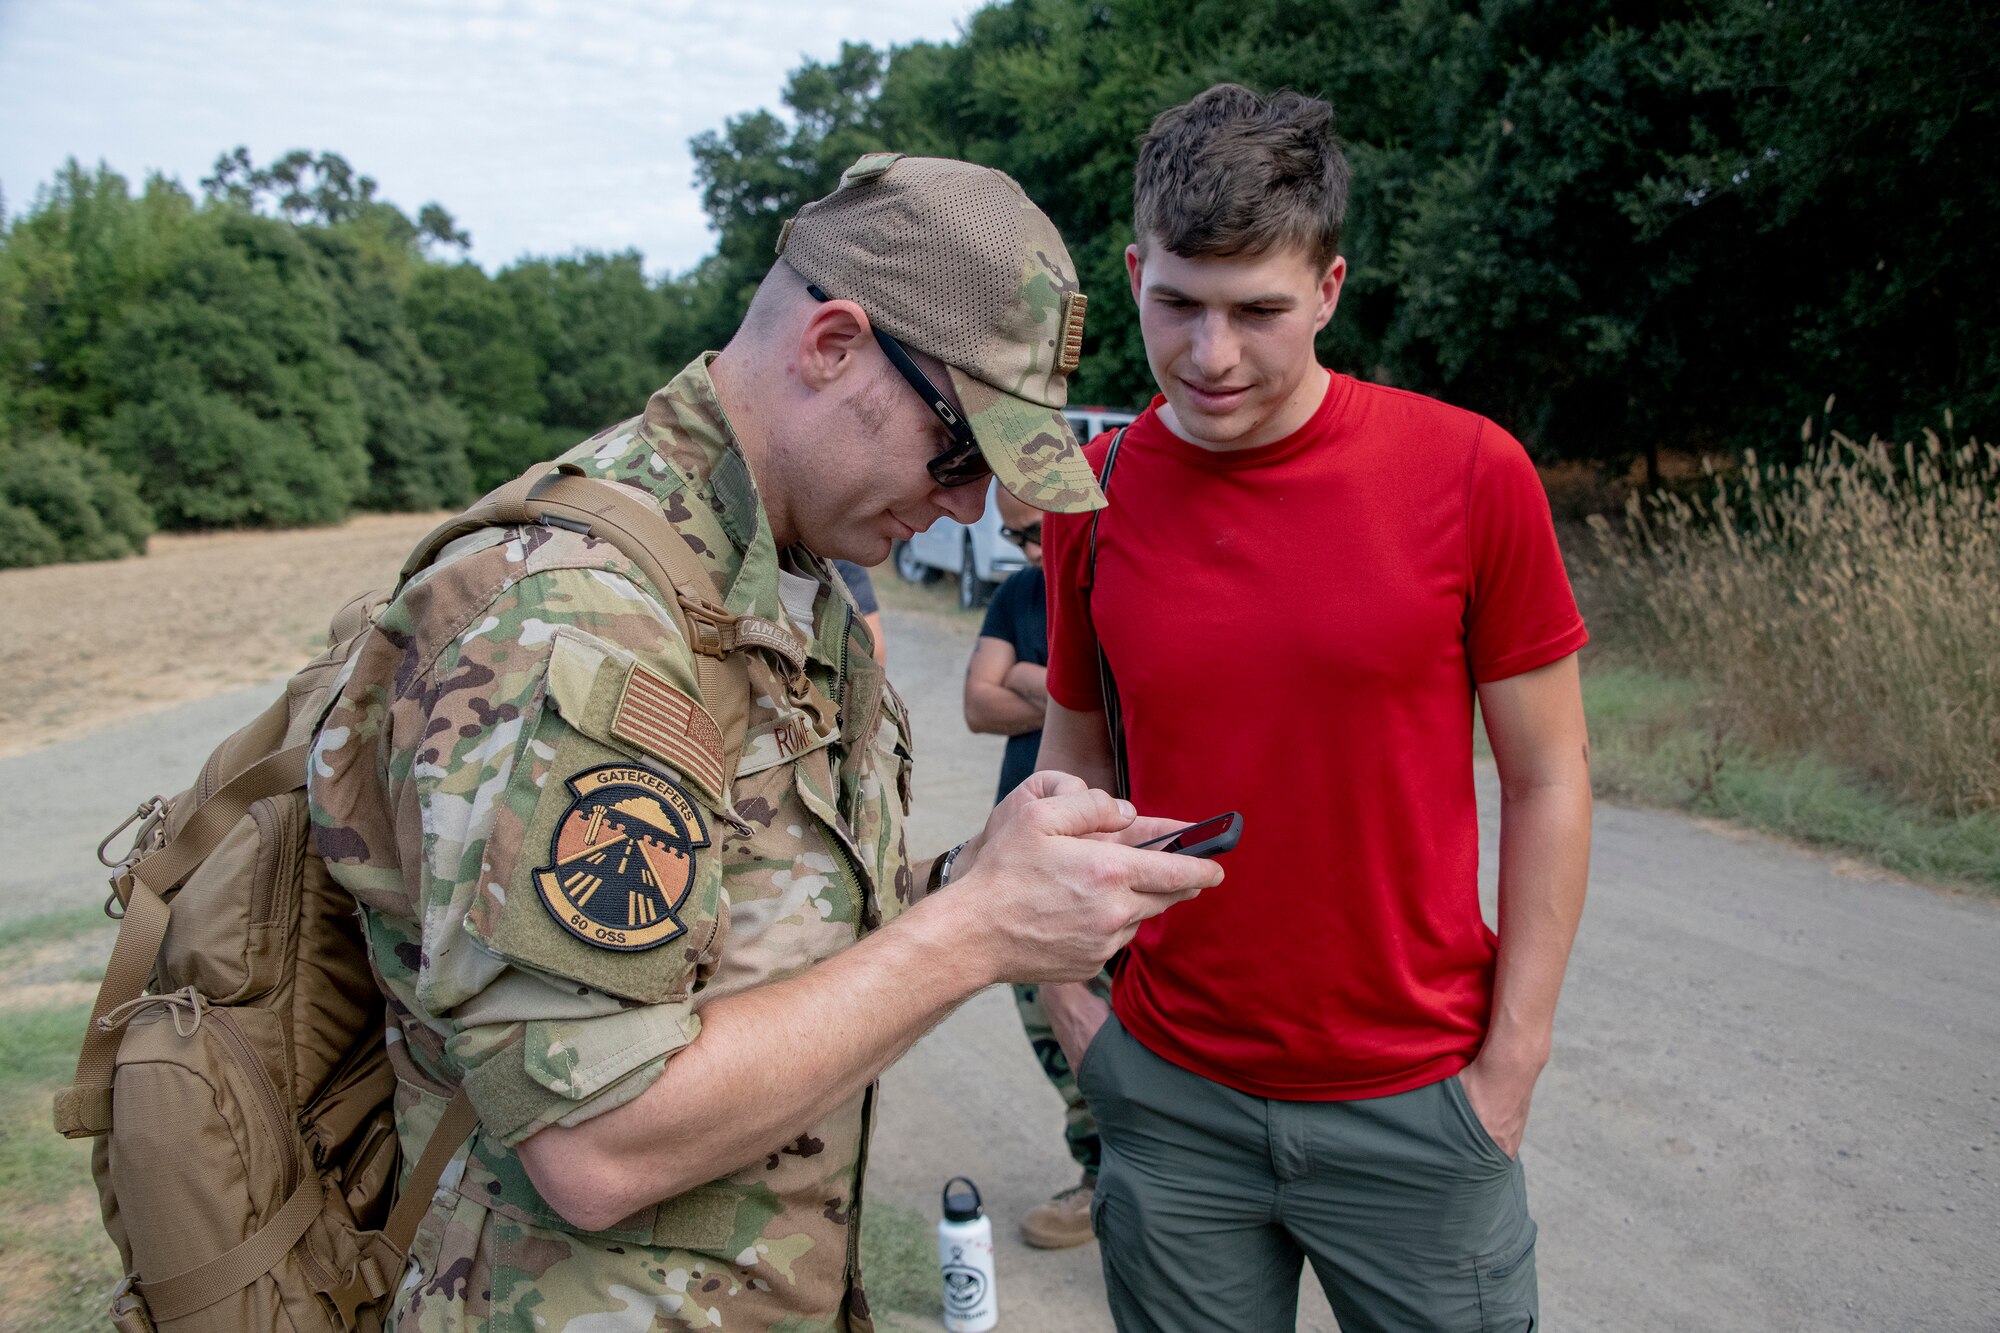 U.S. Air Force Tech. Sgt. Bernie Rowe, 60th Operations Support KC-10 Extender instructor flight engineer, and Nate Simon, Somewear Labs product manager, review procedures for new communications technology during a Survival, Evasion, Resistance and Escape Aug. 5, 2019, near Travis Air Force Base, California. Trainees followed SERE instructors point-to-point to learn the process of gathering materials, seeking shelter, discarding unnecessary supplies, finding food and testing improved communication equipment. (U.S. Air Force photo by Heide Couch)